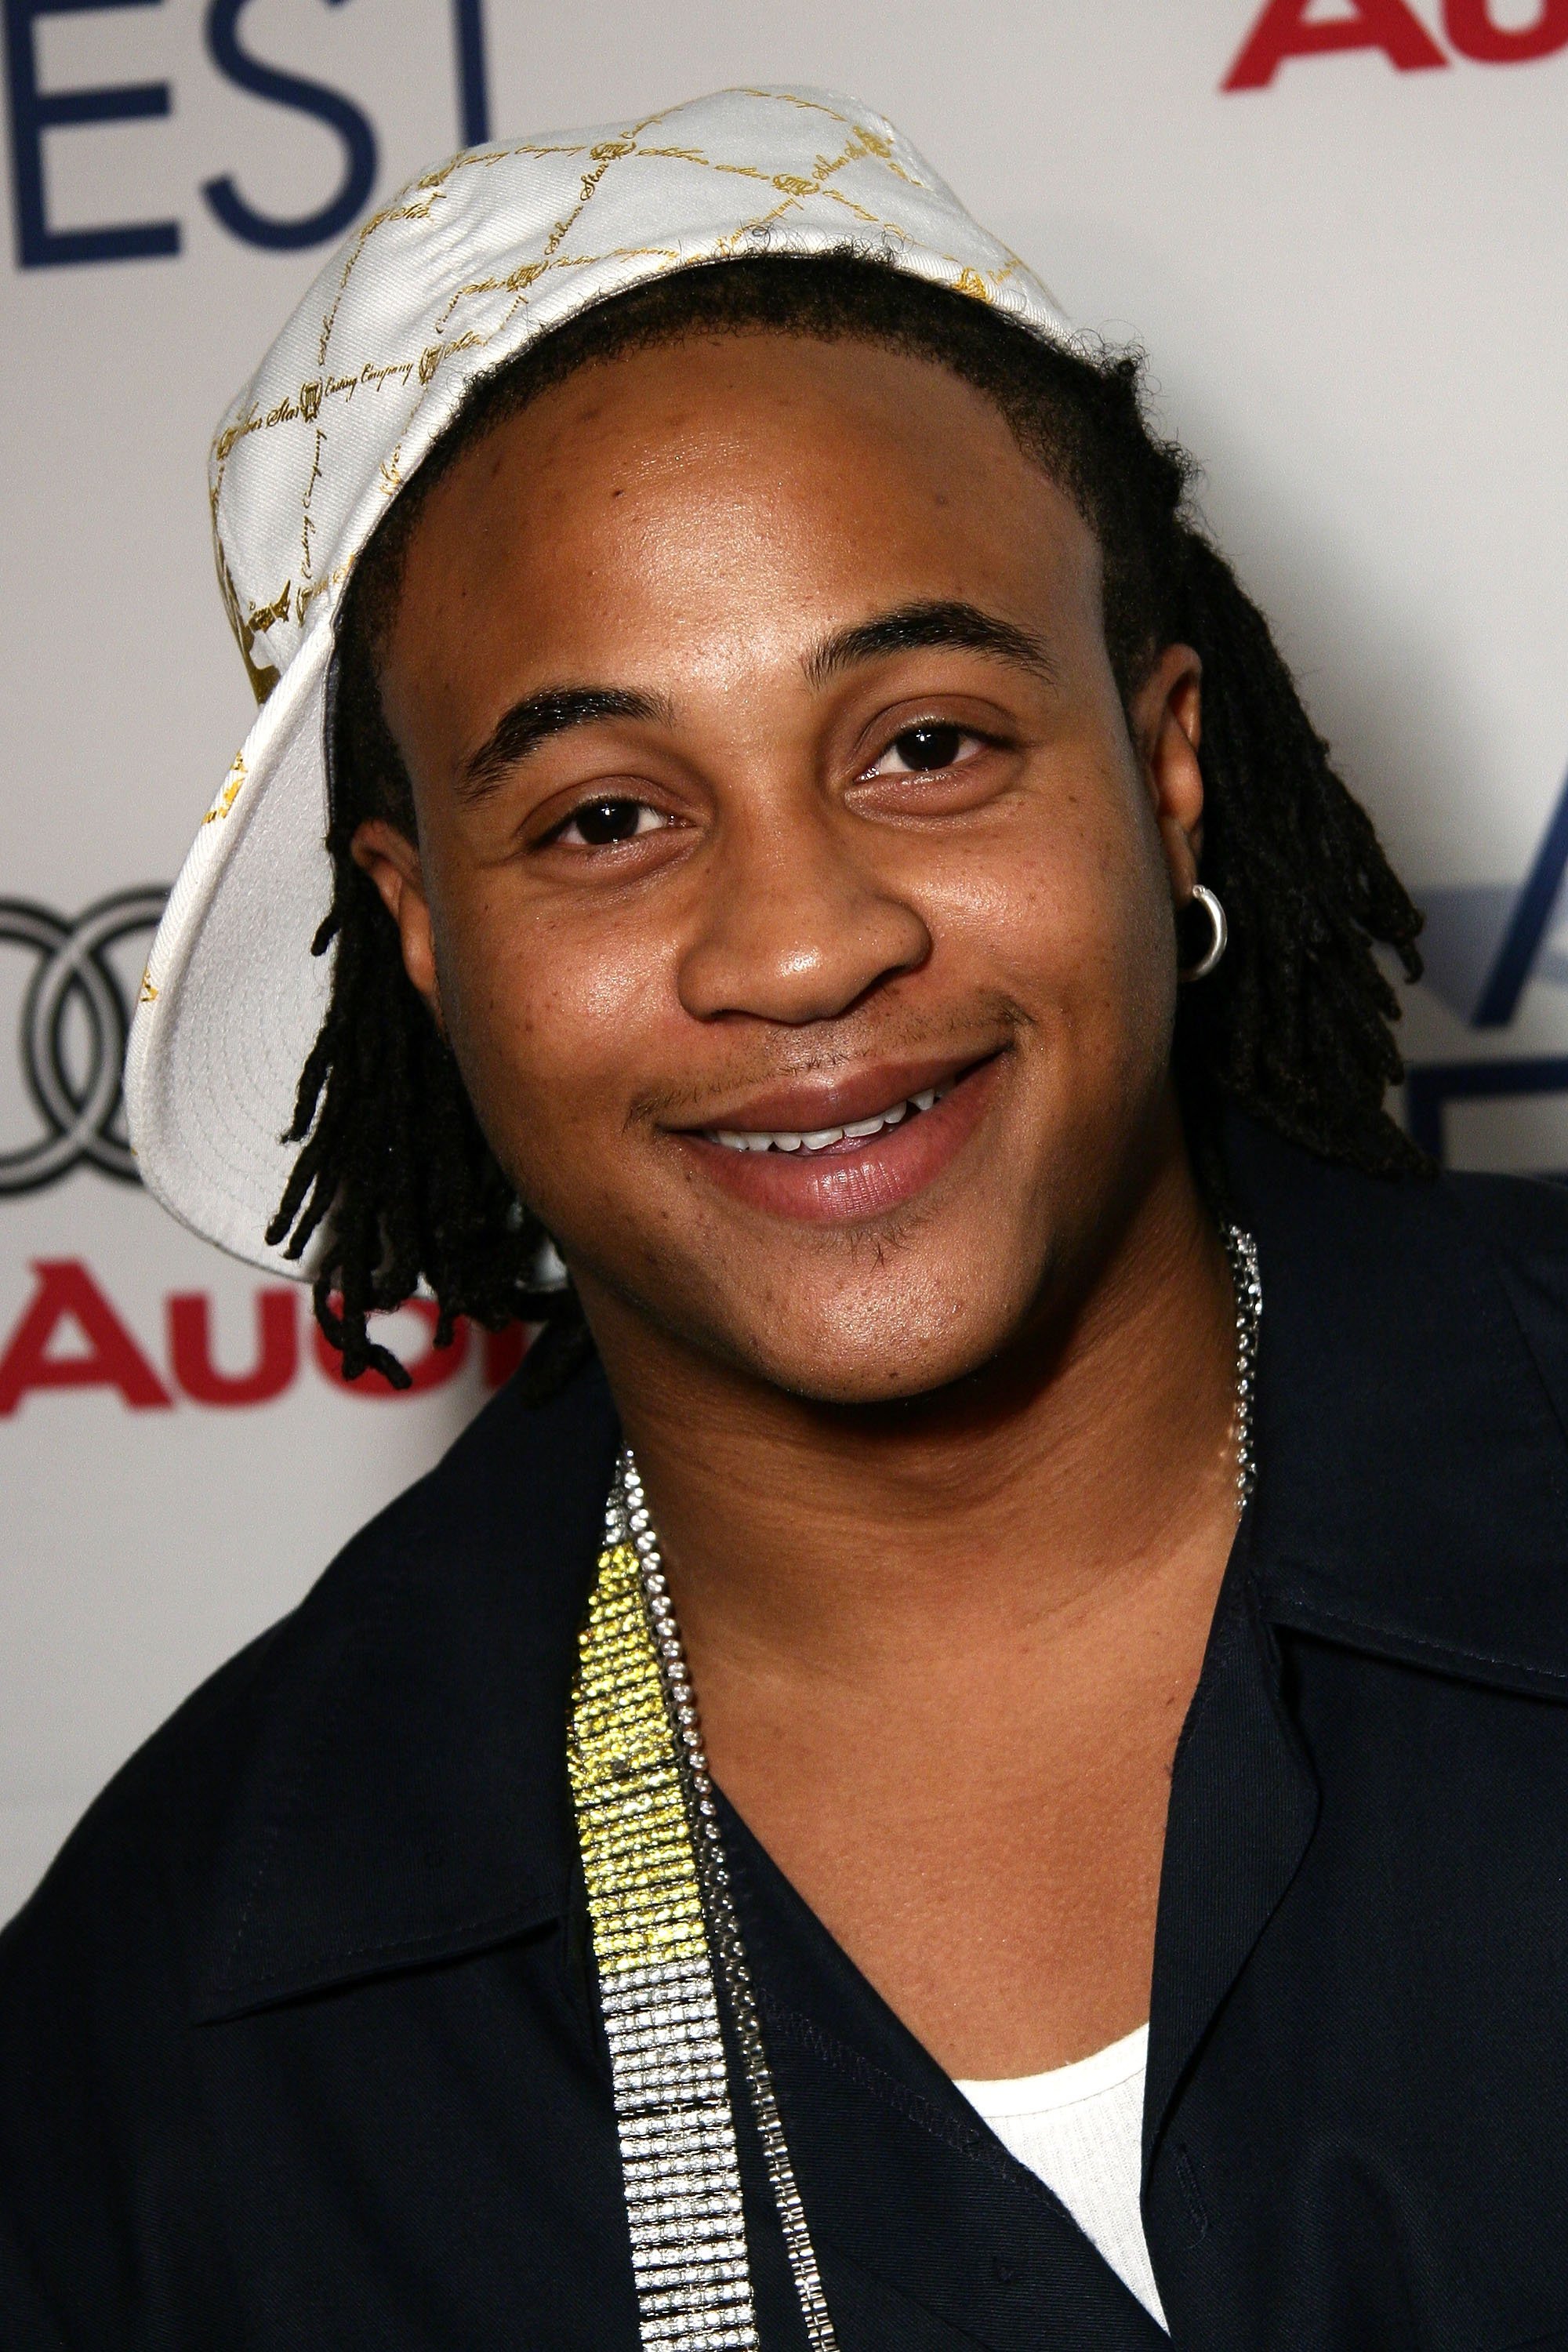 Orlando Brown at the world premiere of "Public Enemy" in November 2007. | Photo: Getty Images